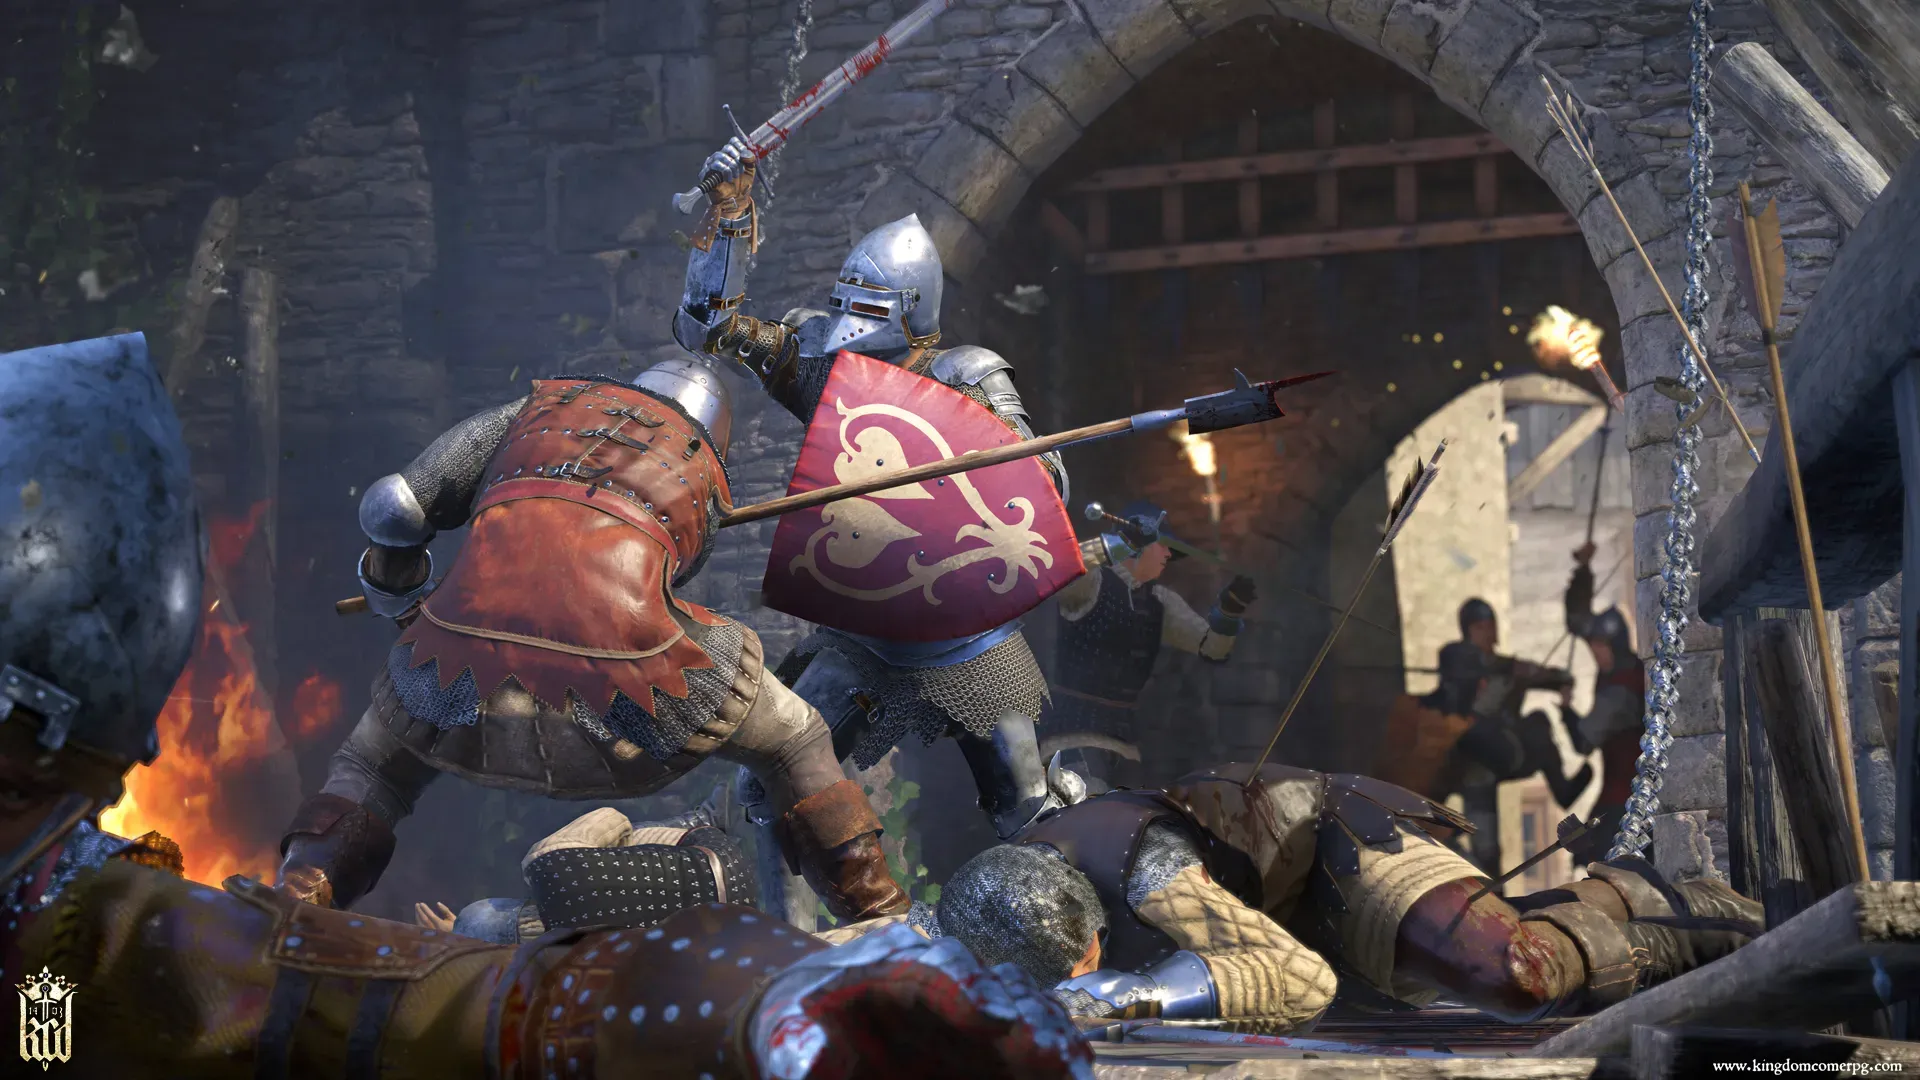 Two knights from Kingdom Come: Deliverance battling on a drawbridge